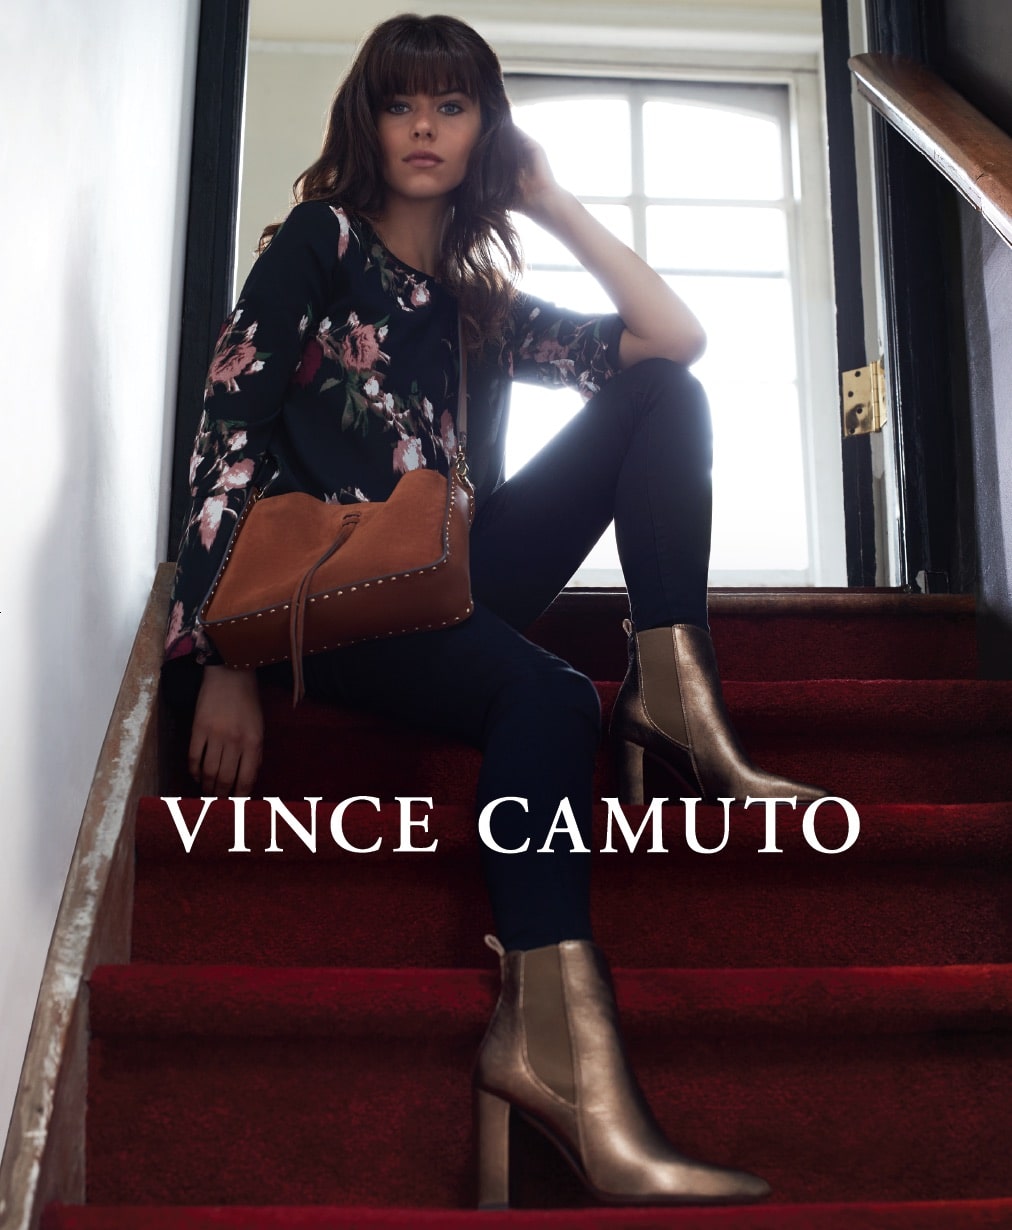 Vince Camuto Remembered As A 'Visionary' Designer – WWD